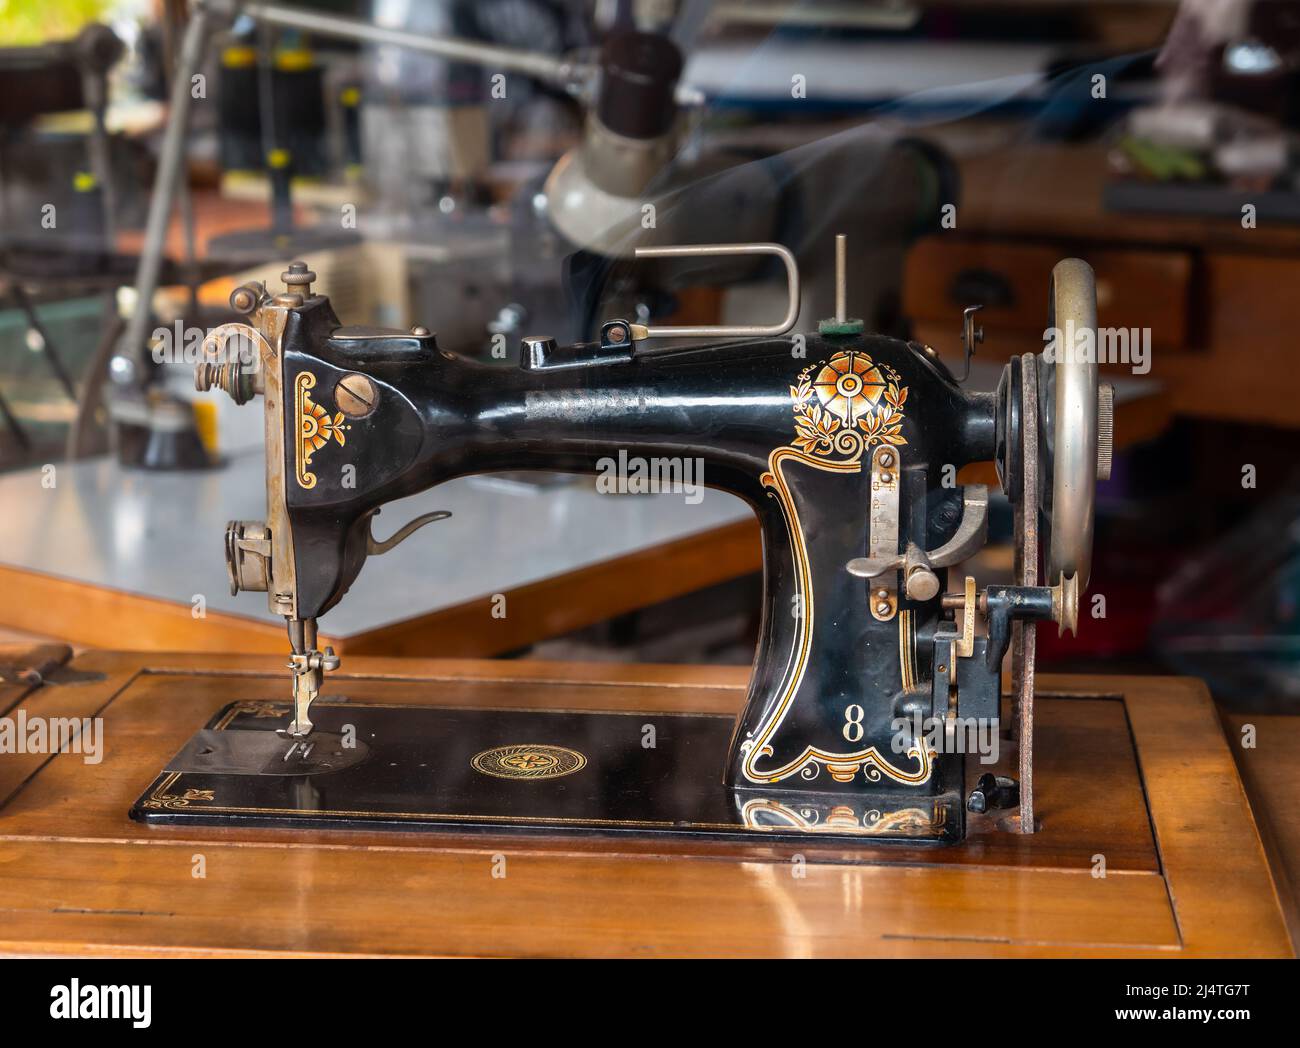 Annecy, France - January 7, 2022: A retro sewing machine with beautiful ornaments in an antique shop window in Annecy Stock Photo